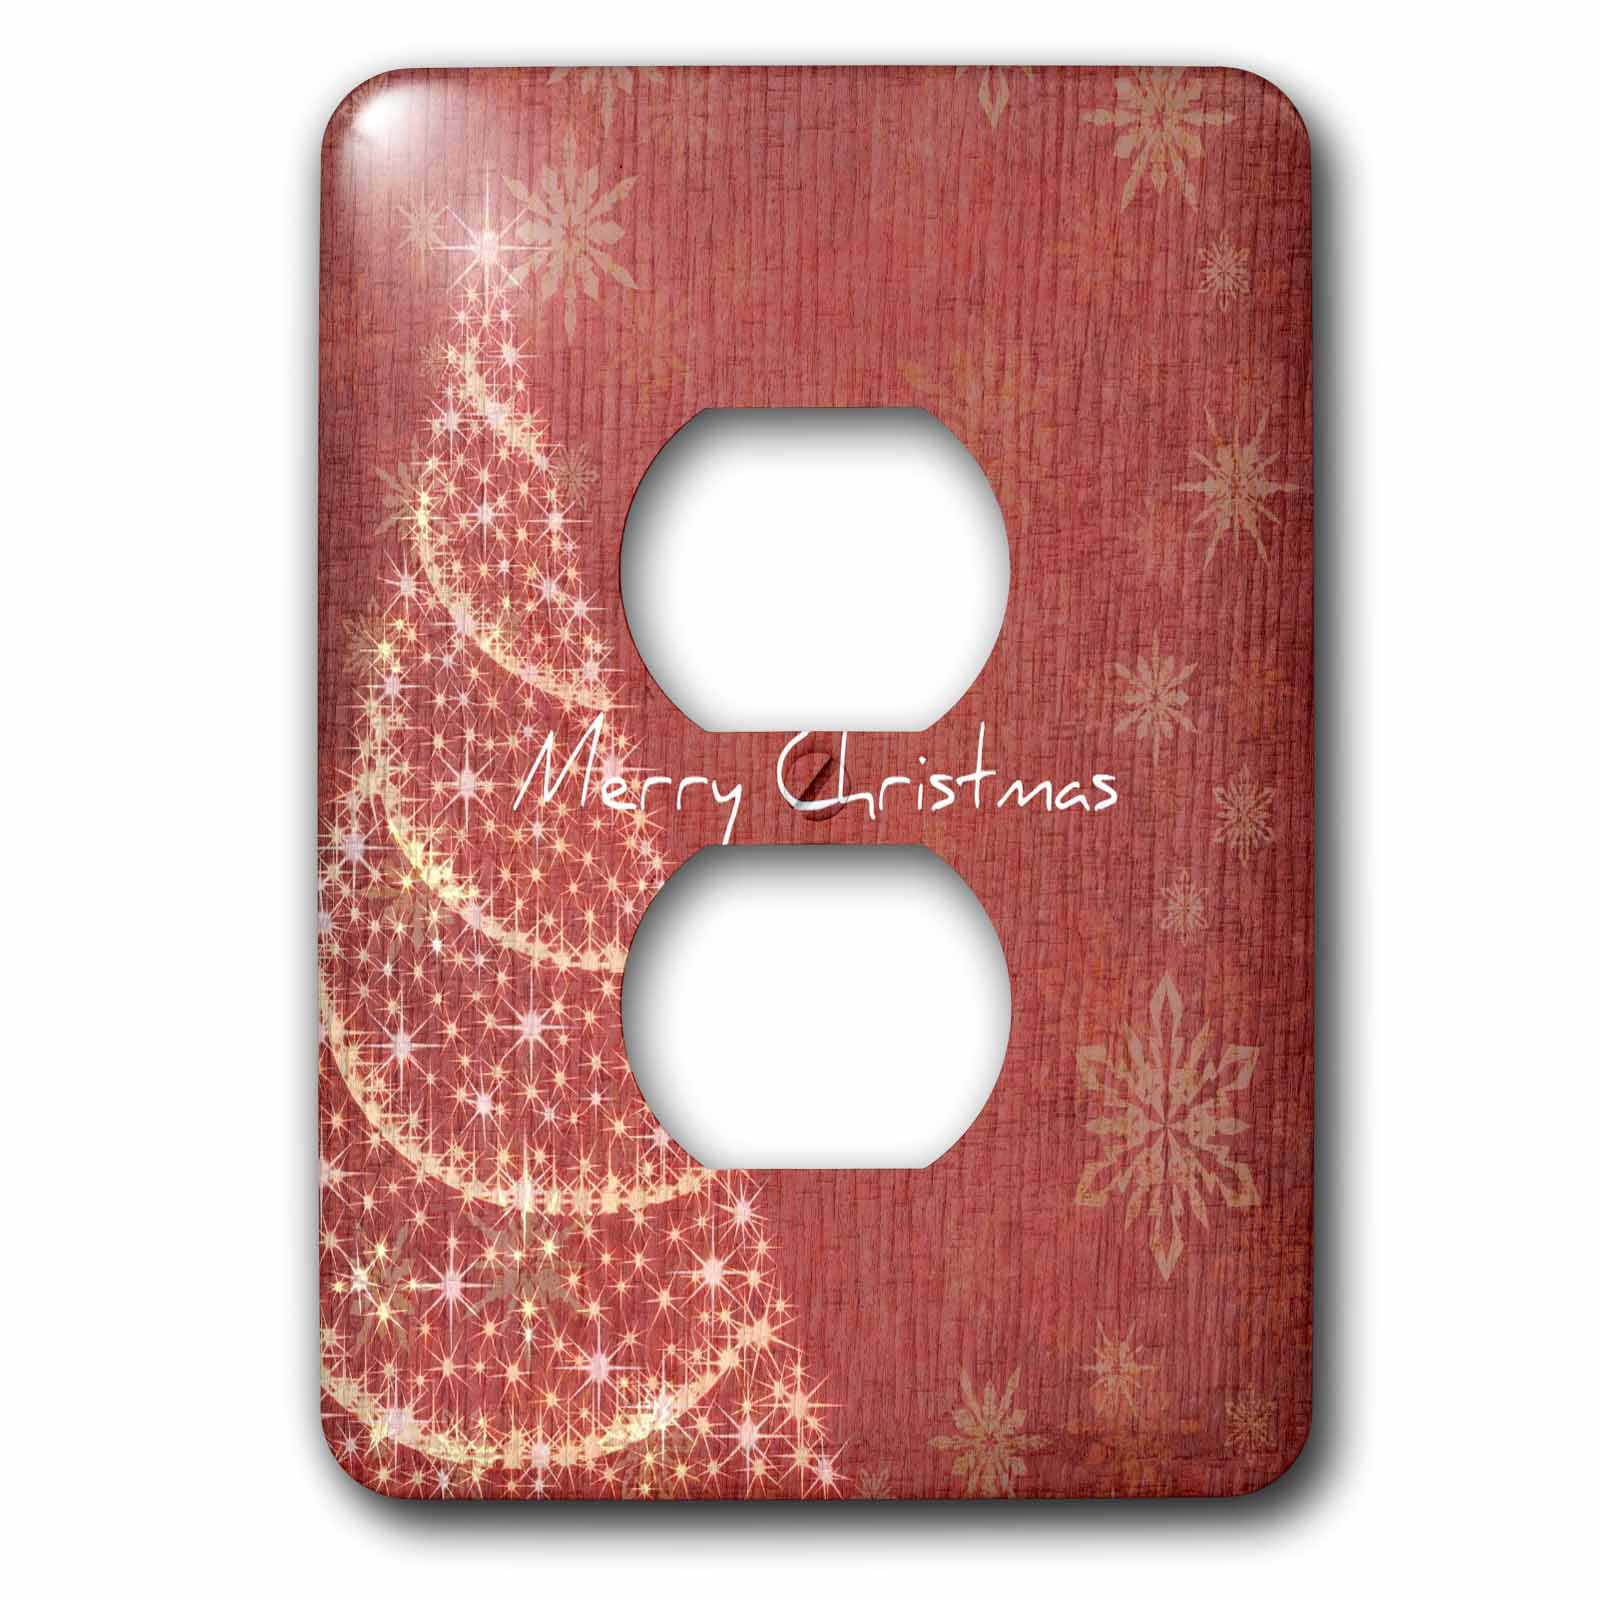 3dRose lsp_59045_6 Red And Christmas Snowflakes Winter Art 2 Plug Outlet Cover White